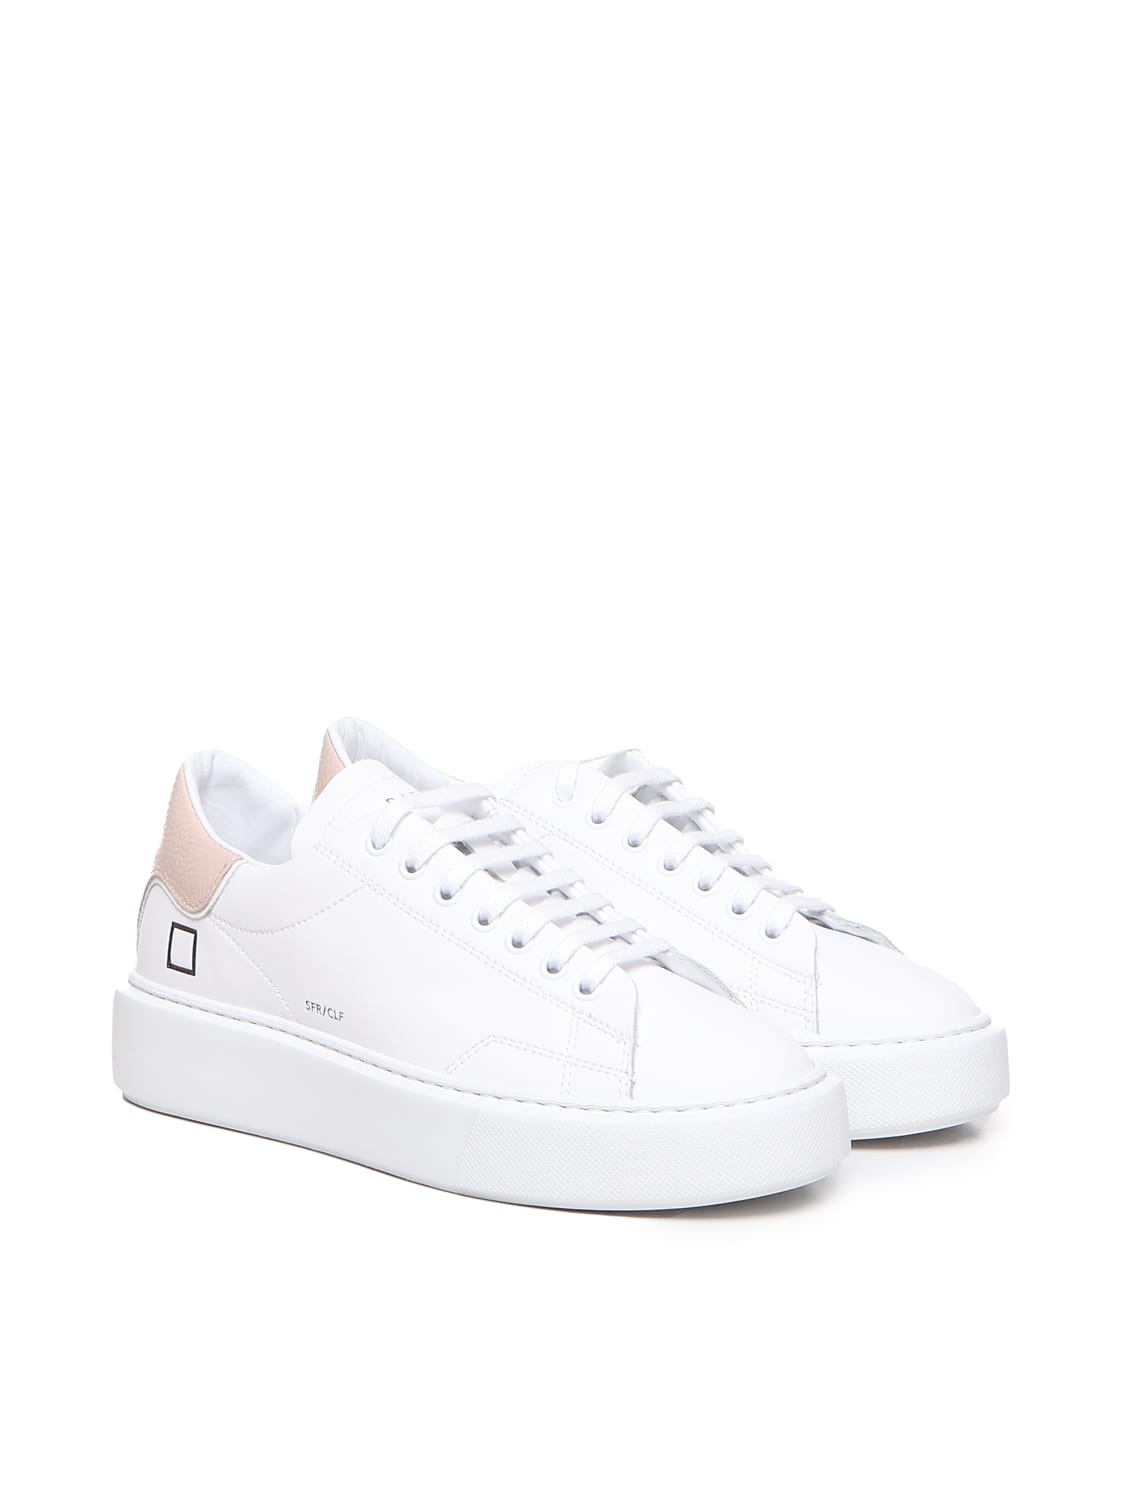 Shop Date Sfera Basic Sneakers In White-pink